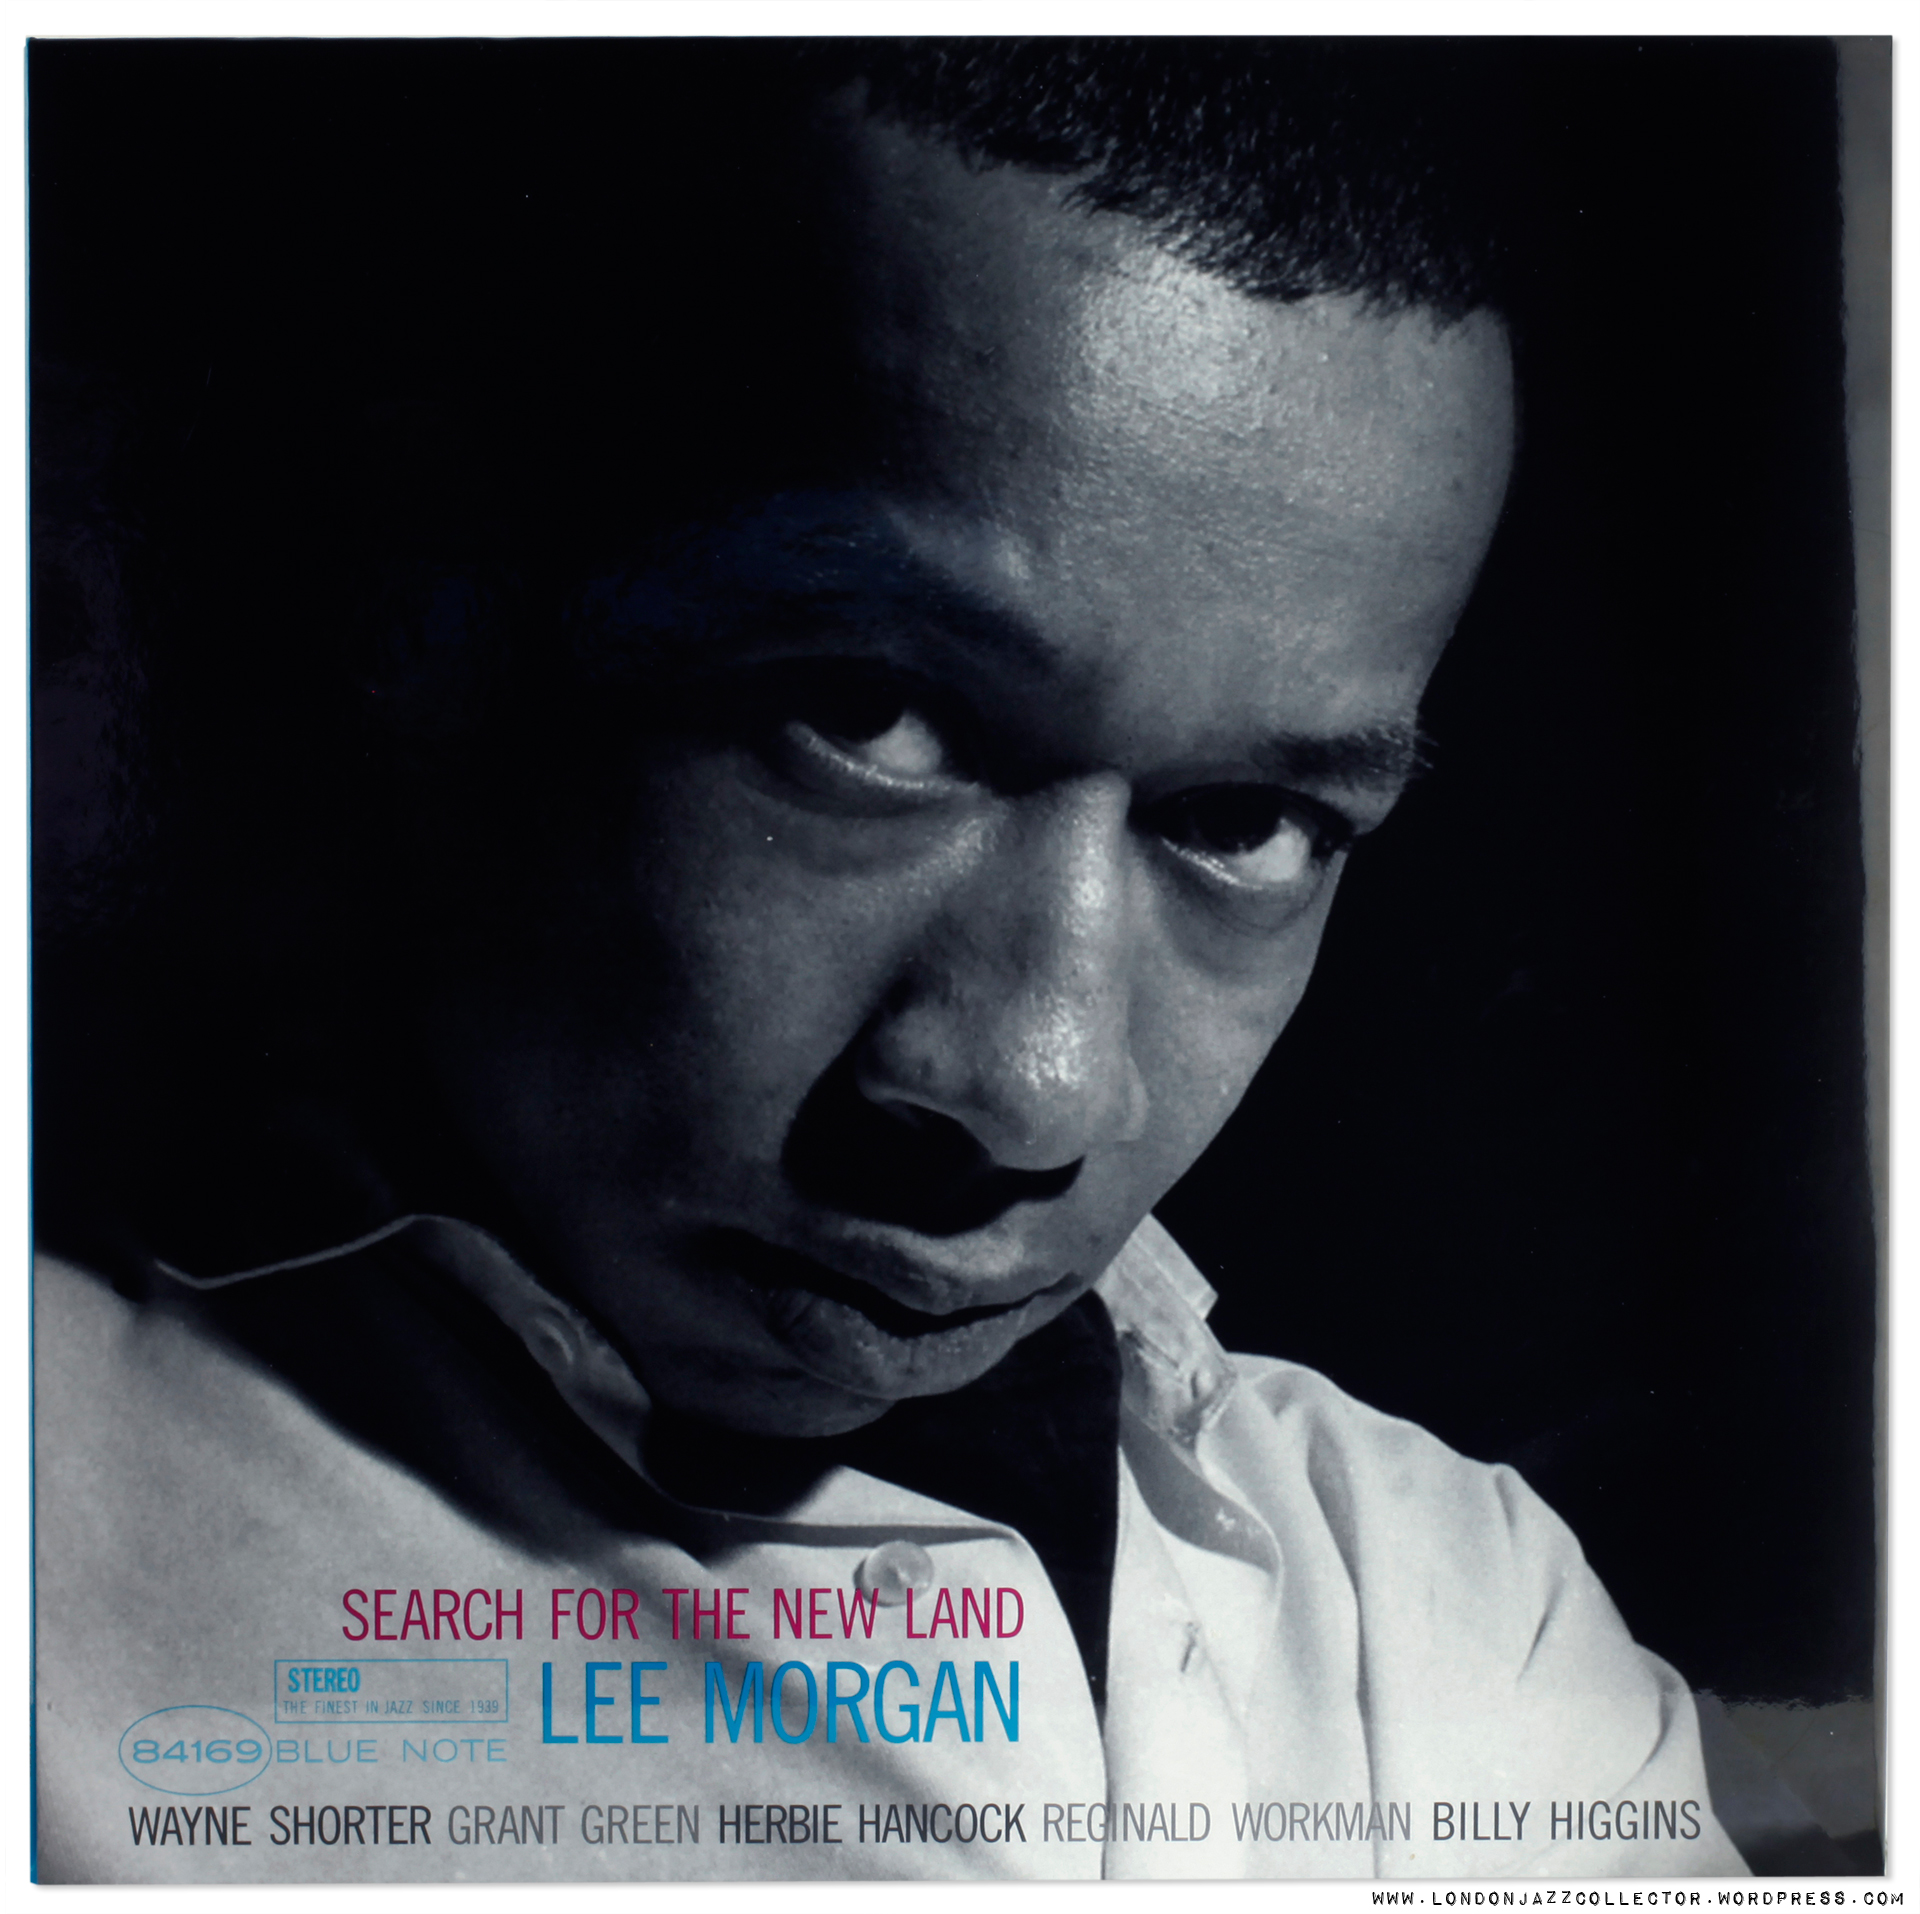 jazz - [Jazz] Playlist - Page 20 Lee-morgan-in-search-of-new-land-cover-mm33-1920-ljc